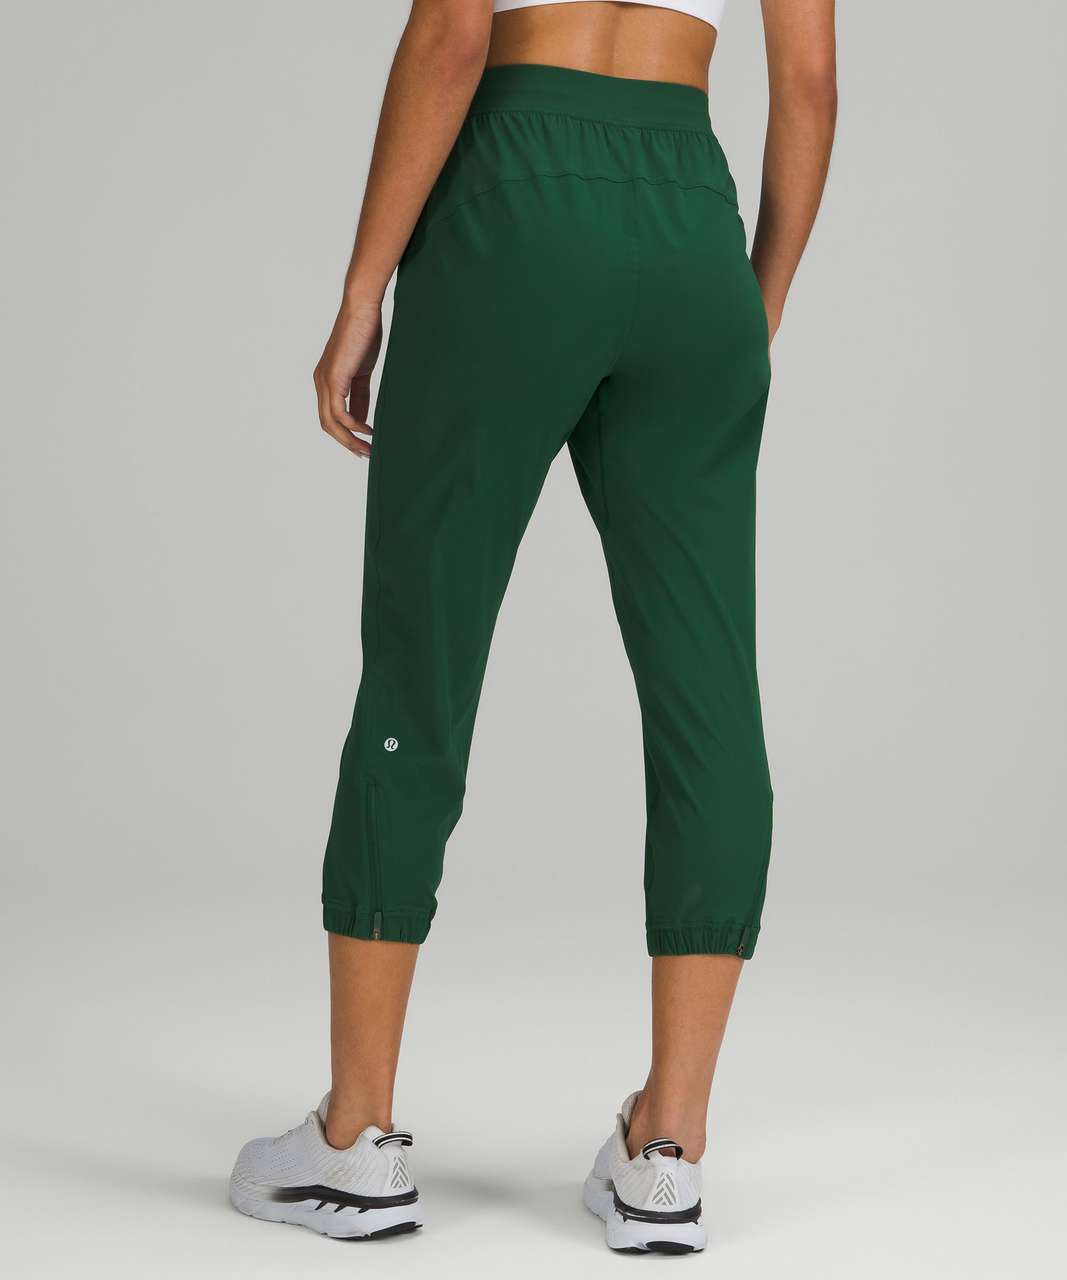 lululemon athletica, Pants & Jumpsuits, Euc Lululemon All The Right  Places Crop Side Pockets Fatigue Green Size 8